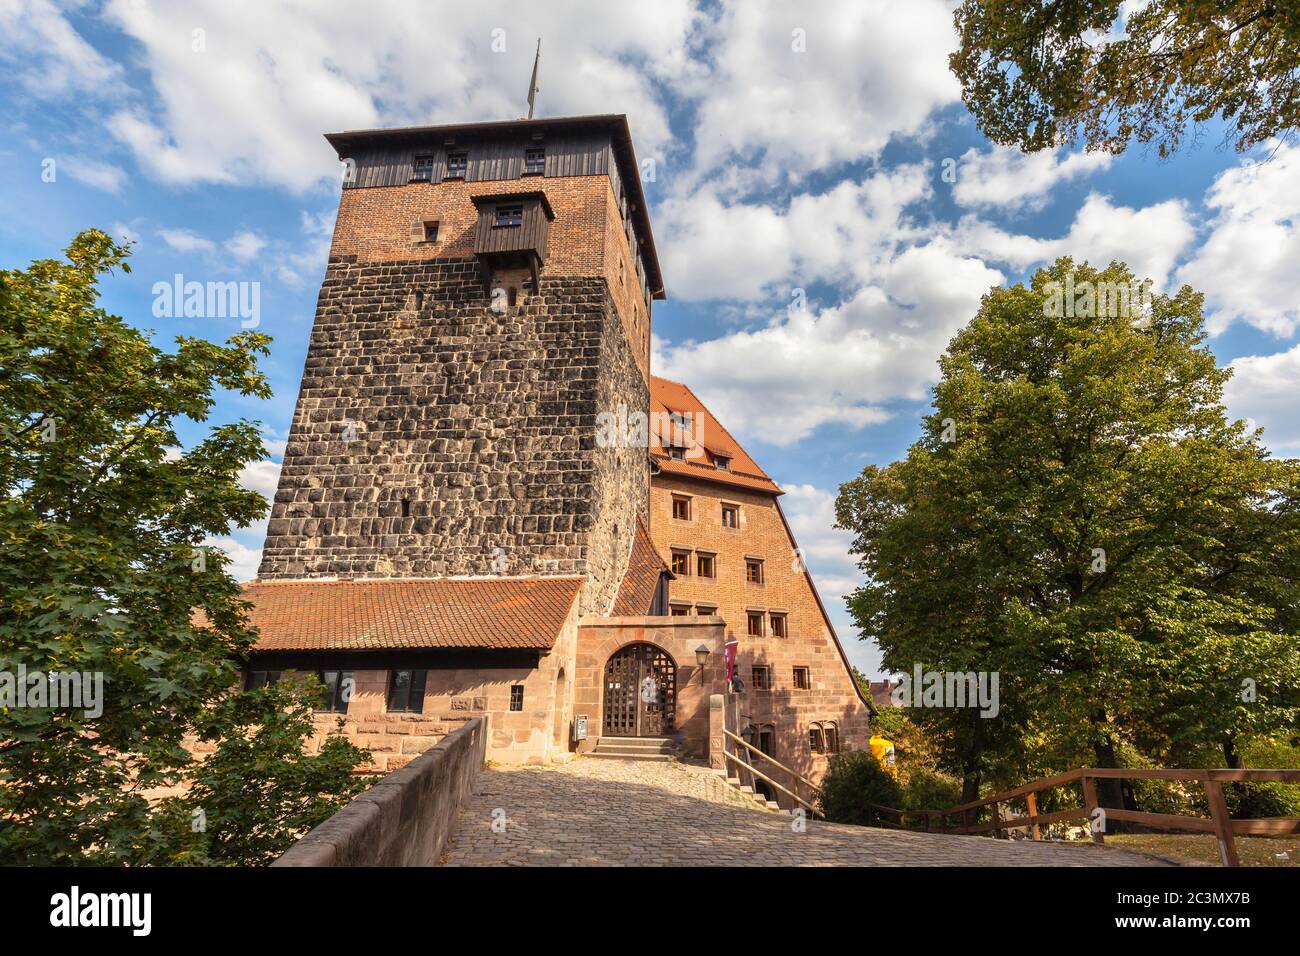 View of the Pentagonal Tower and Imperial Stables of Nuremberg Castle, a group of medieval fortified buildings on a sandstone ridge in Nuremberg, Bava Stock Photo